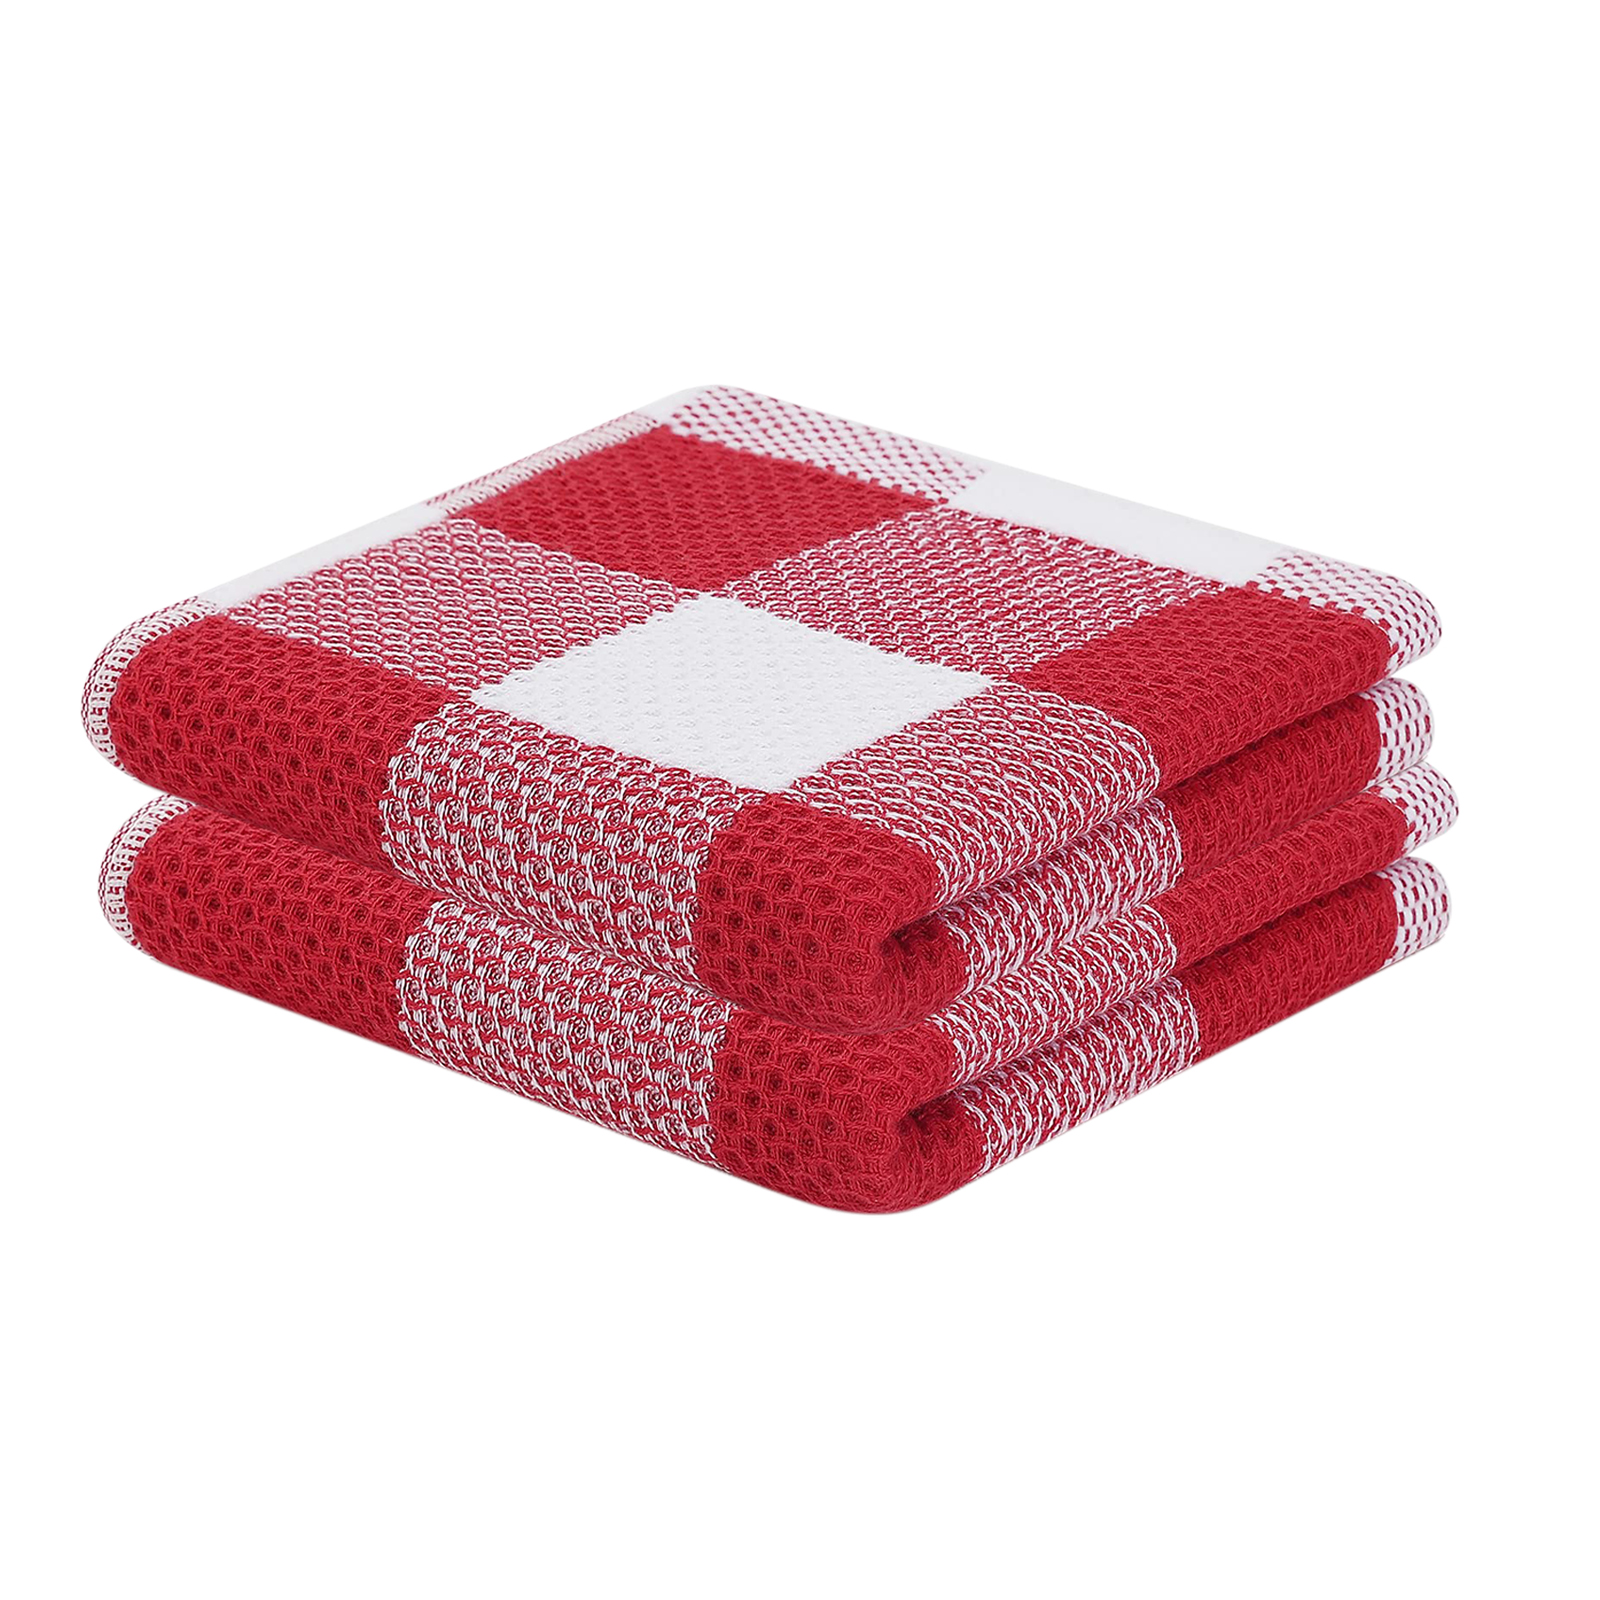 Waffle Weave Check Plaid Dish Cloths,, Super Soft And Absorbent